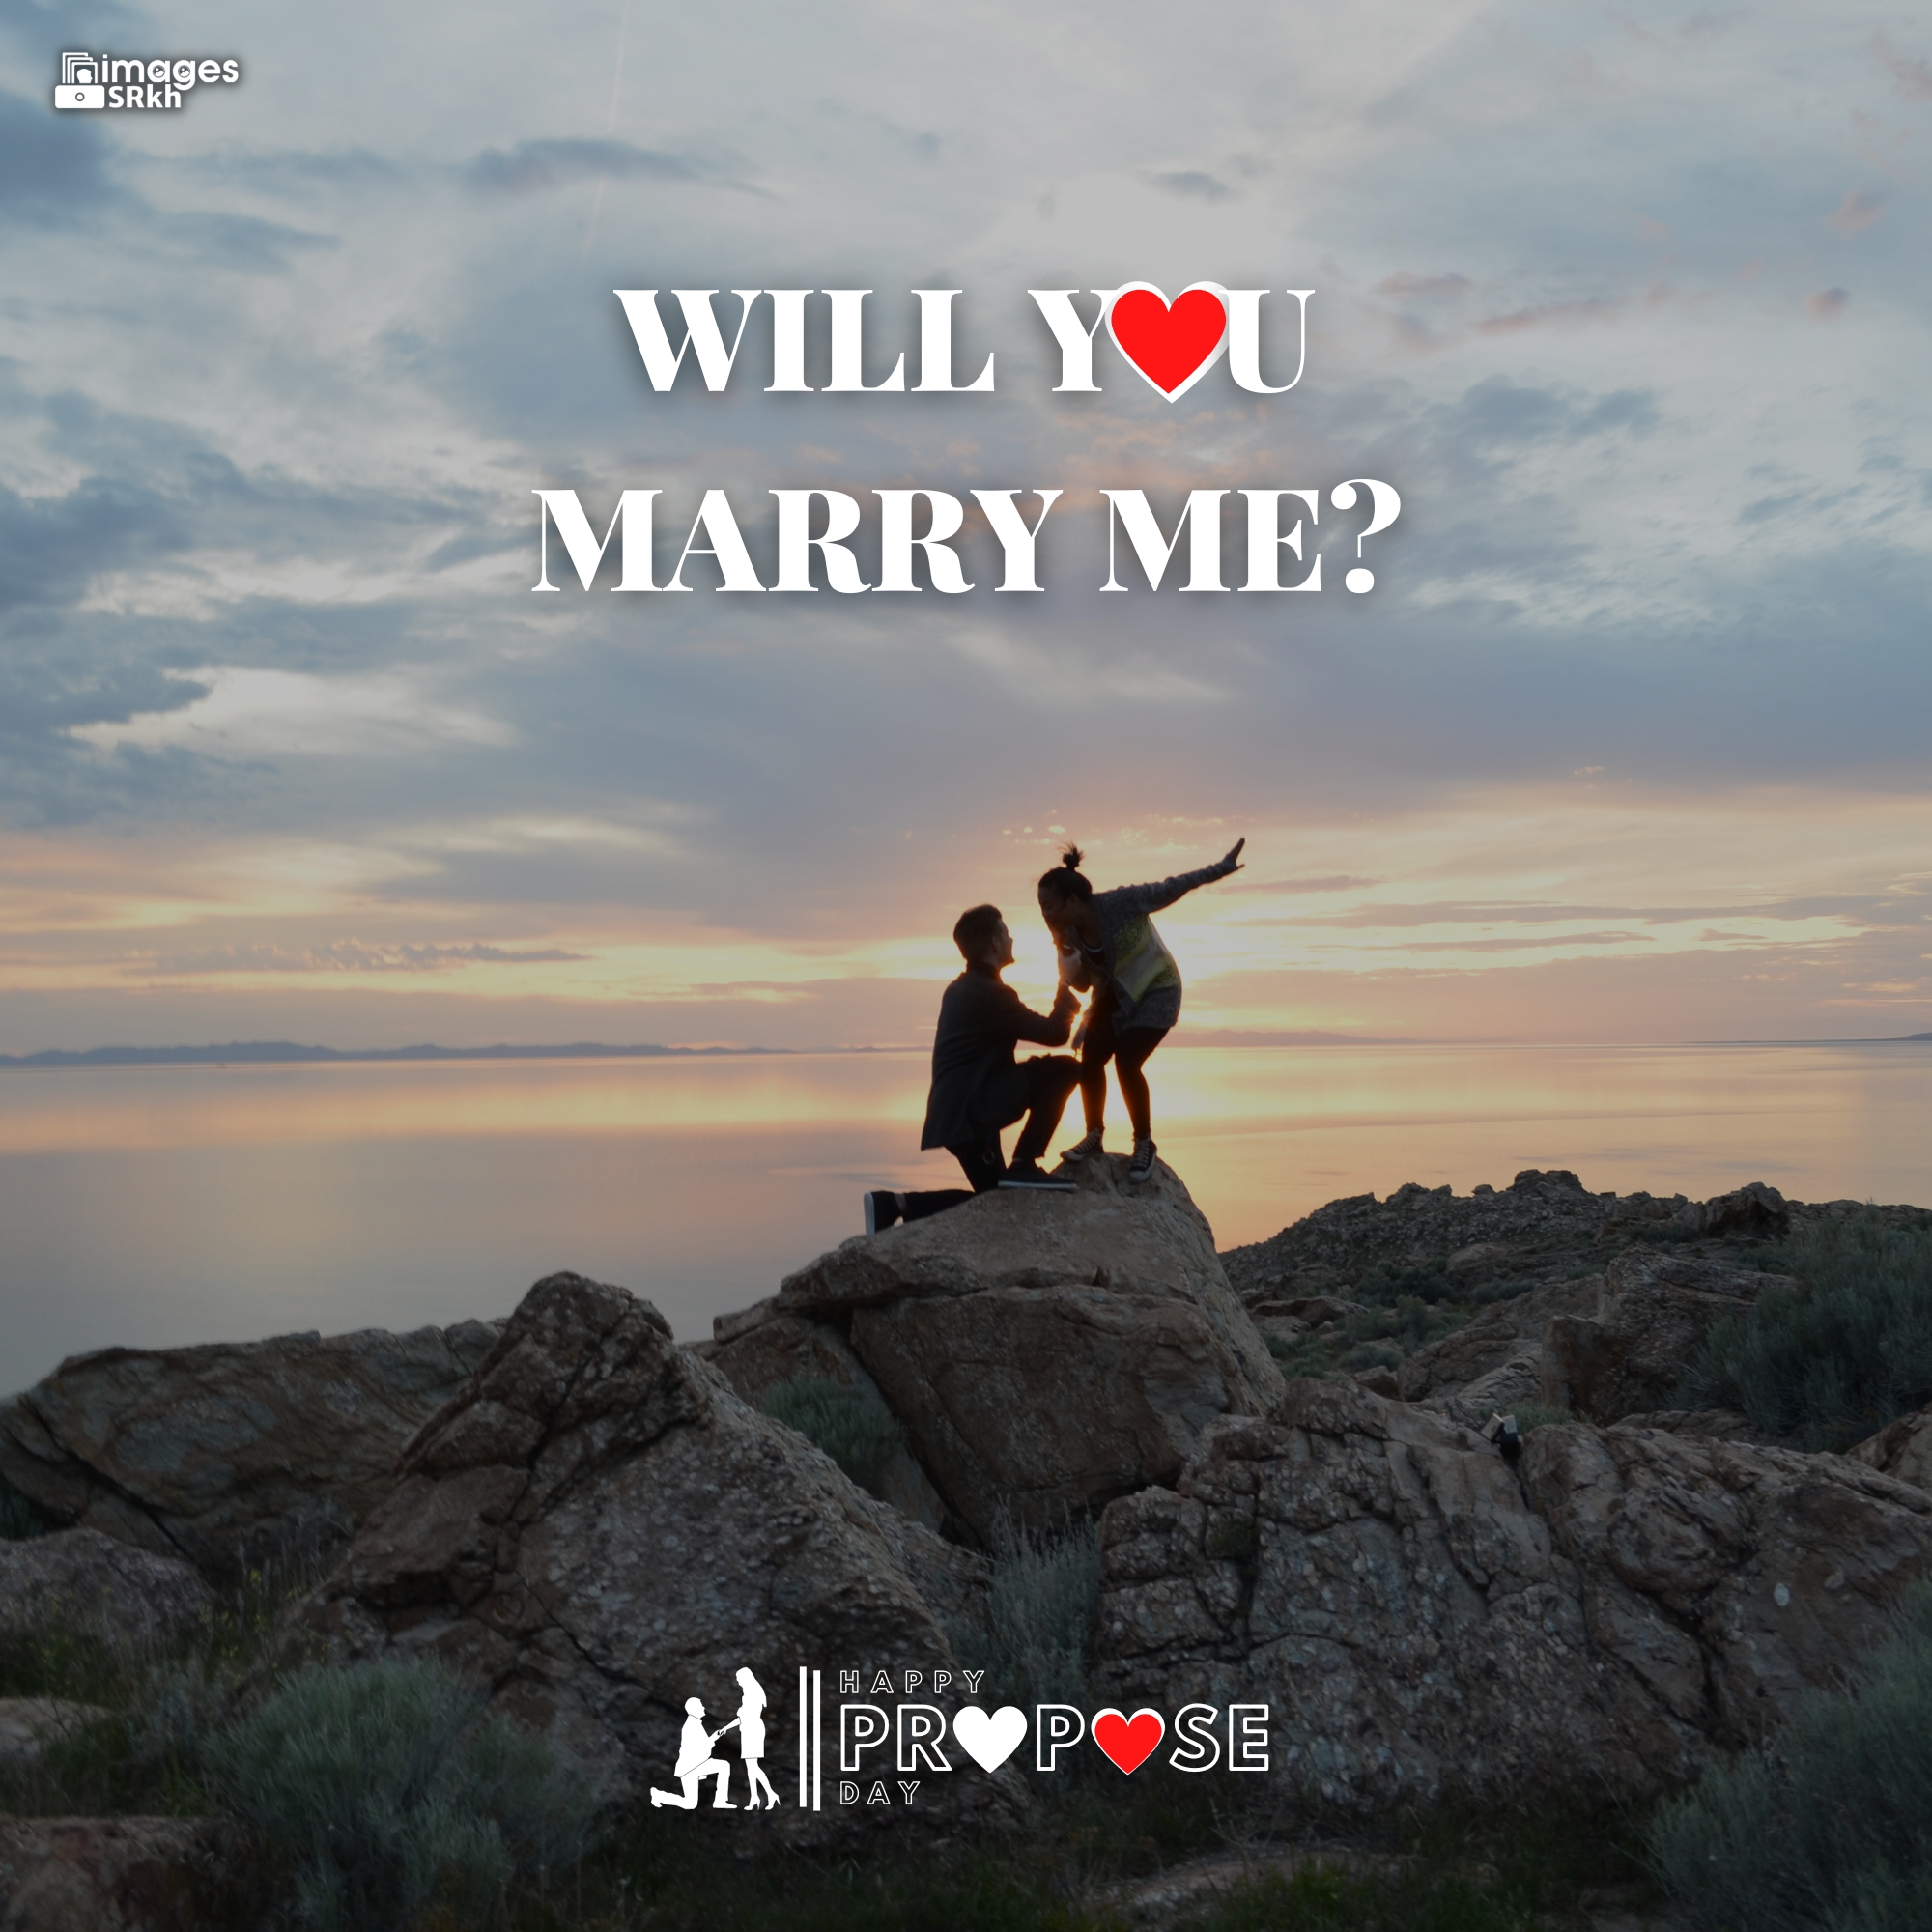 Propose Day Images | 260 | Will You MARRY ME